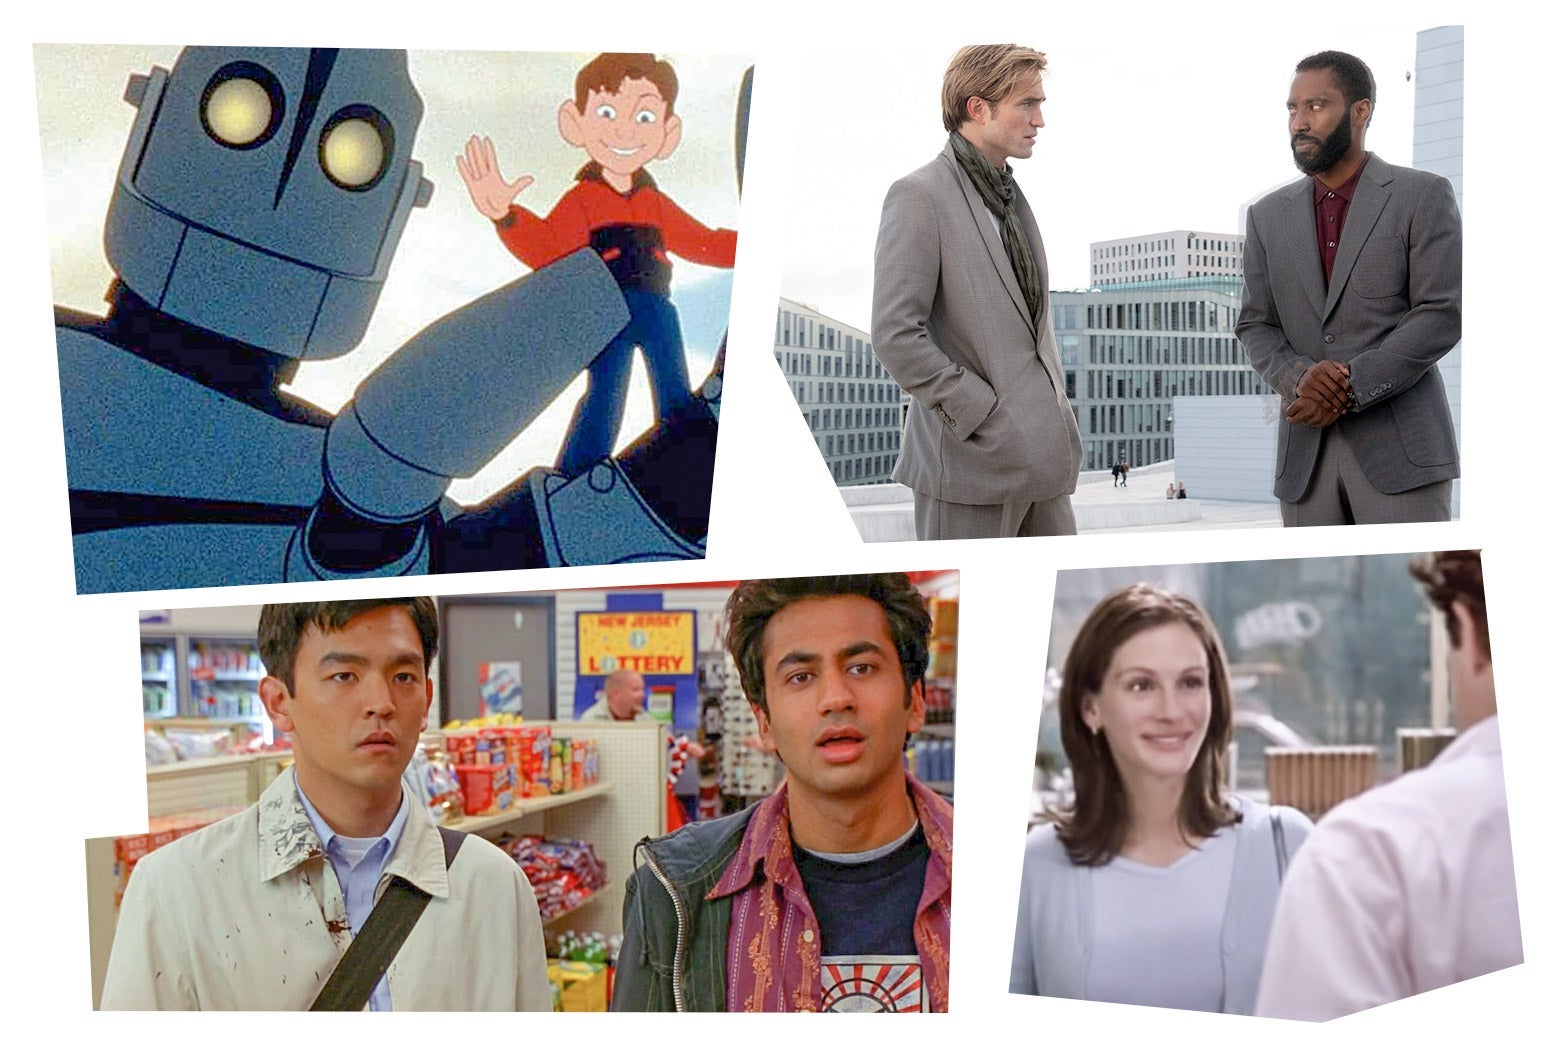 Stills from Harold and Kumar, The Iron Giant, Tenet, and Notting Hill.